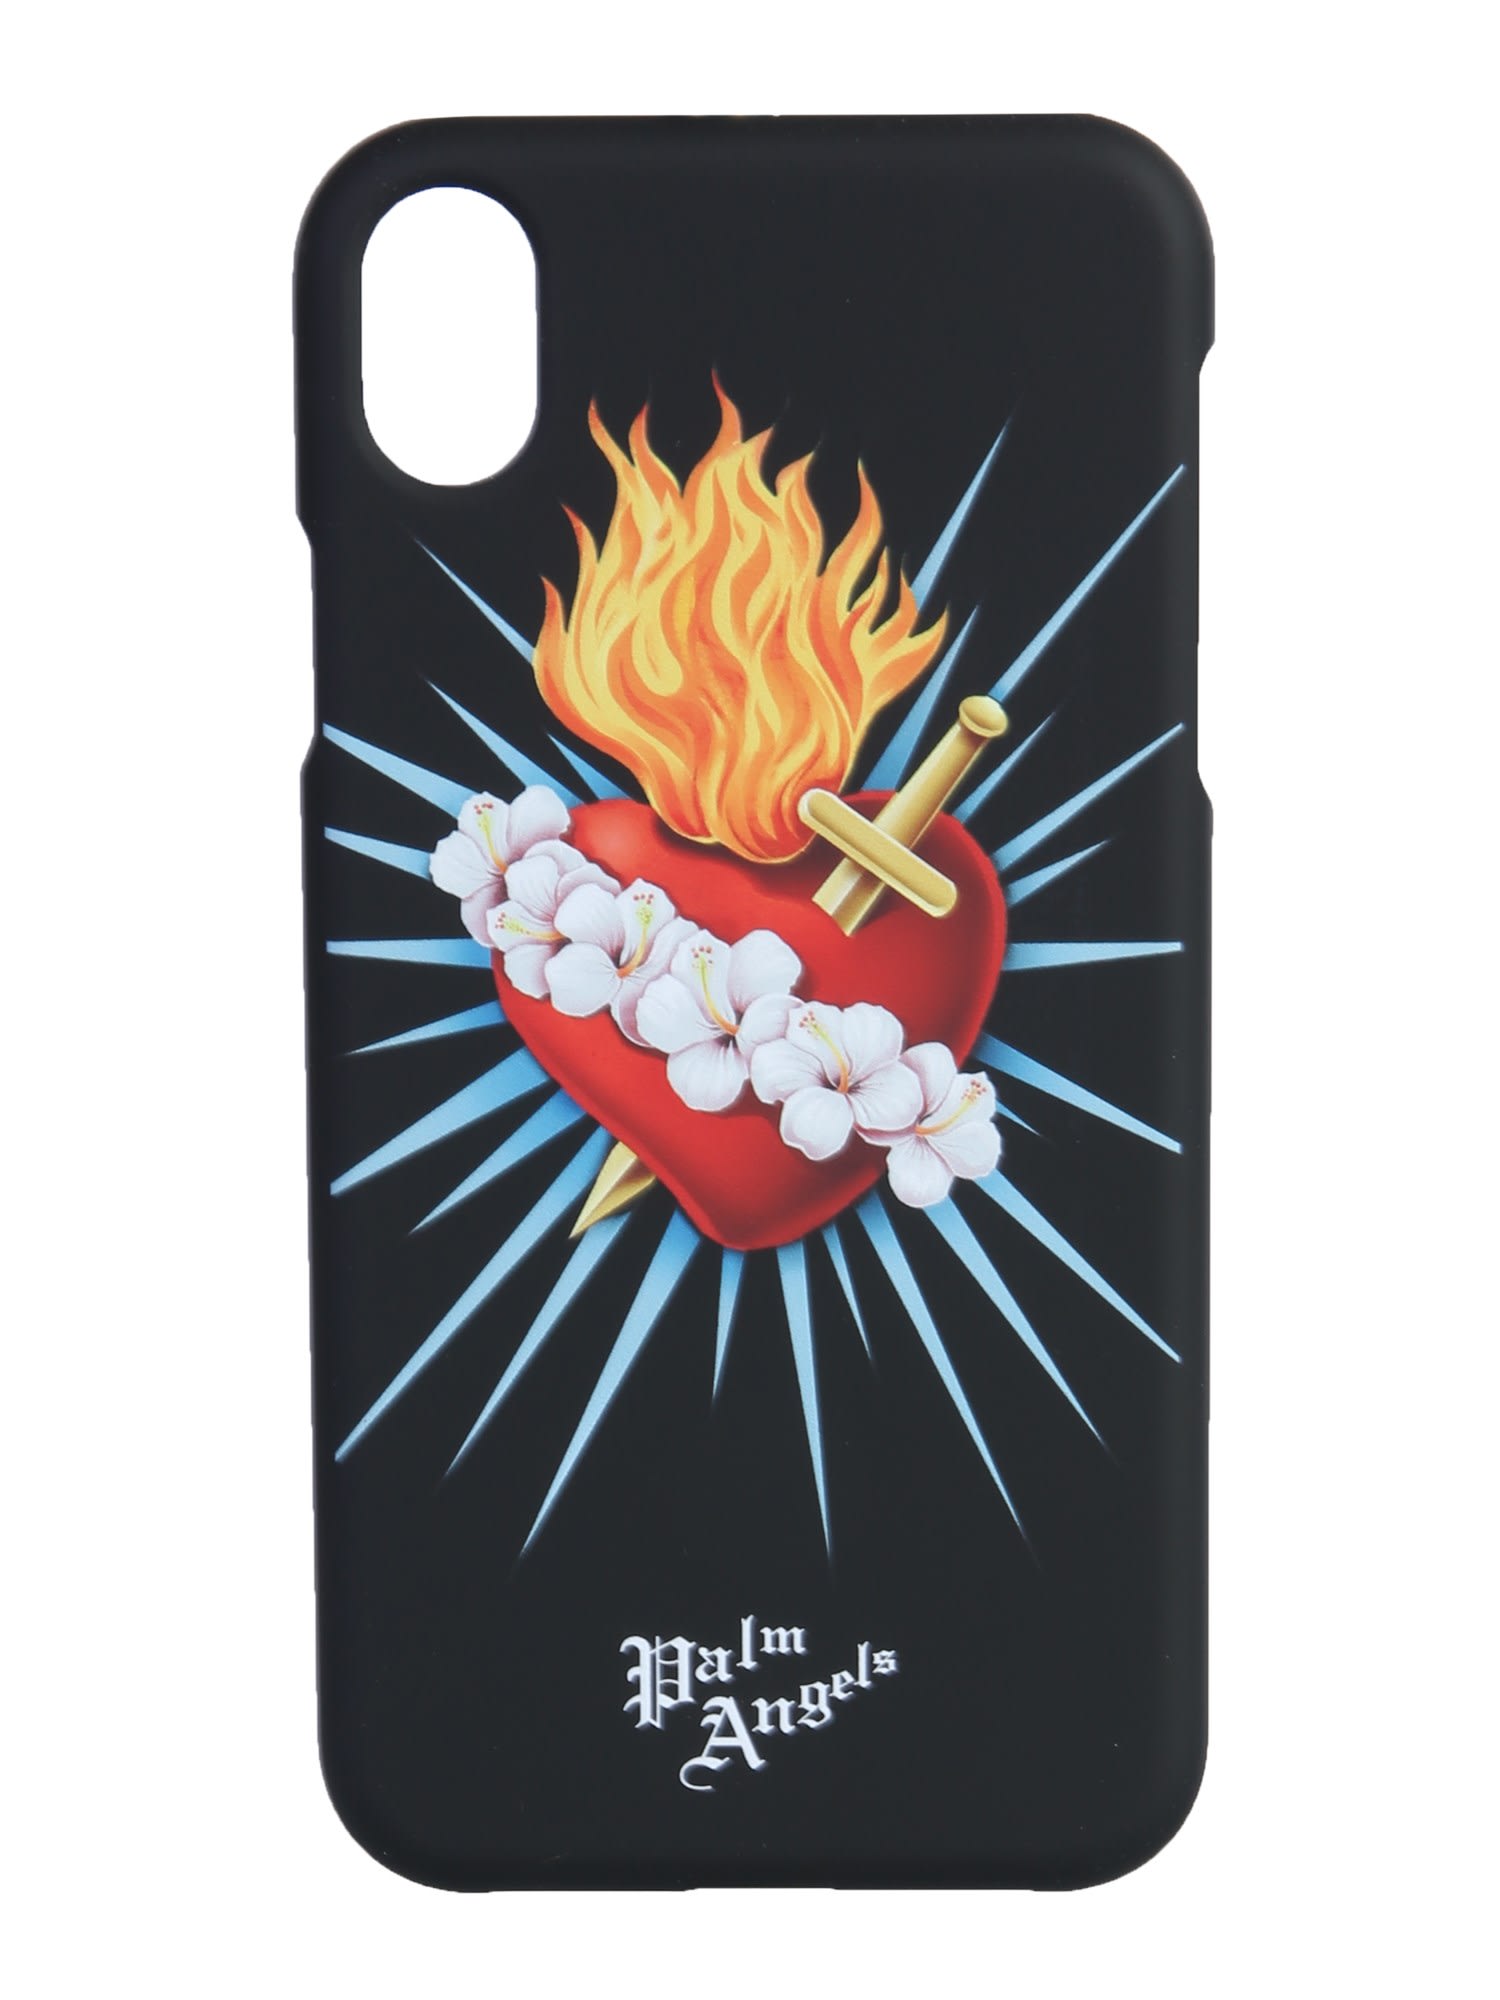 PALM ANGELS IPHONE XR COVER,11330305